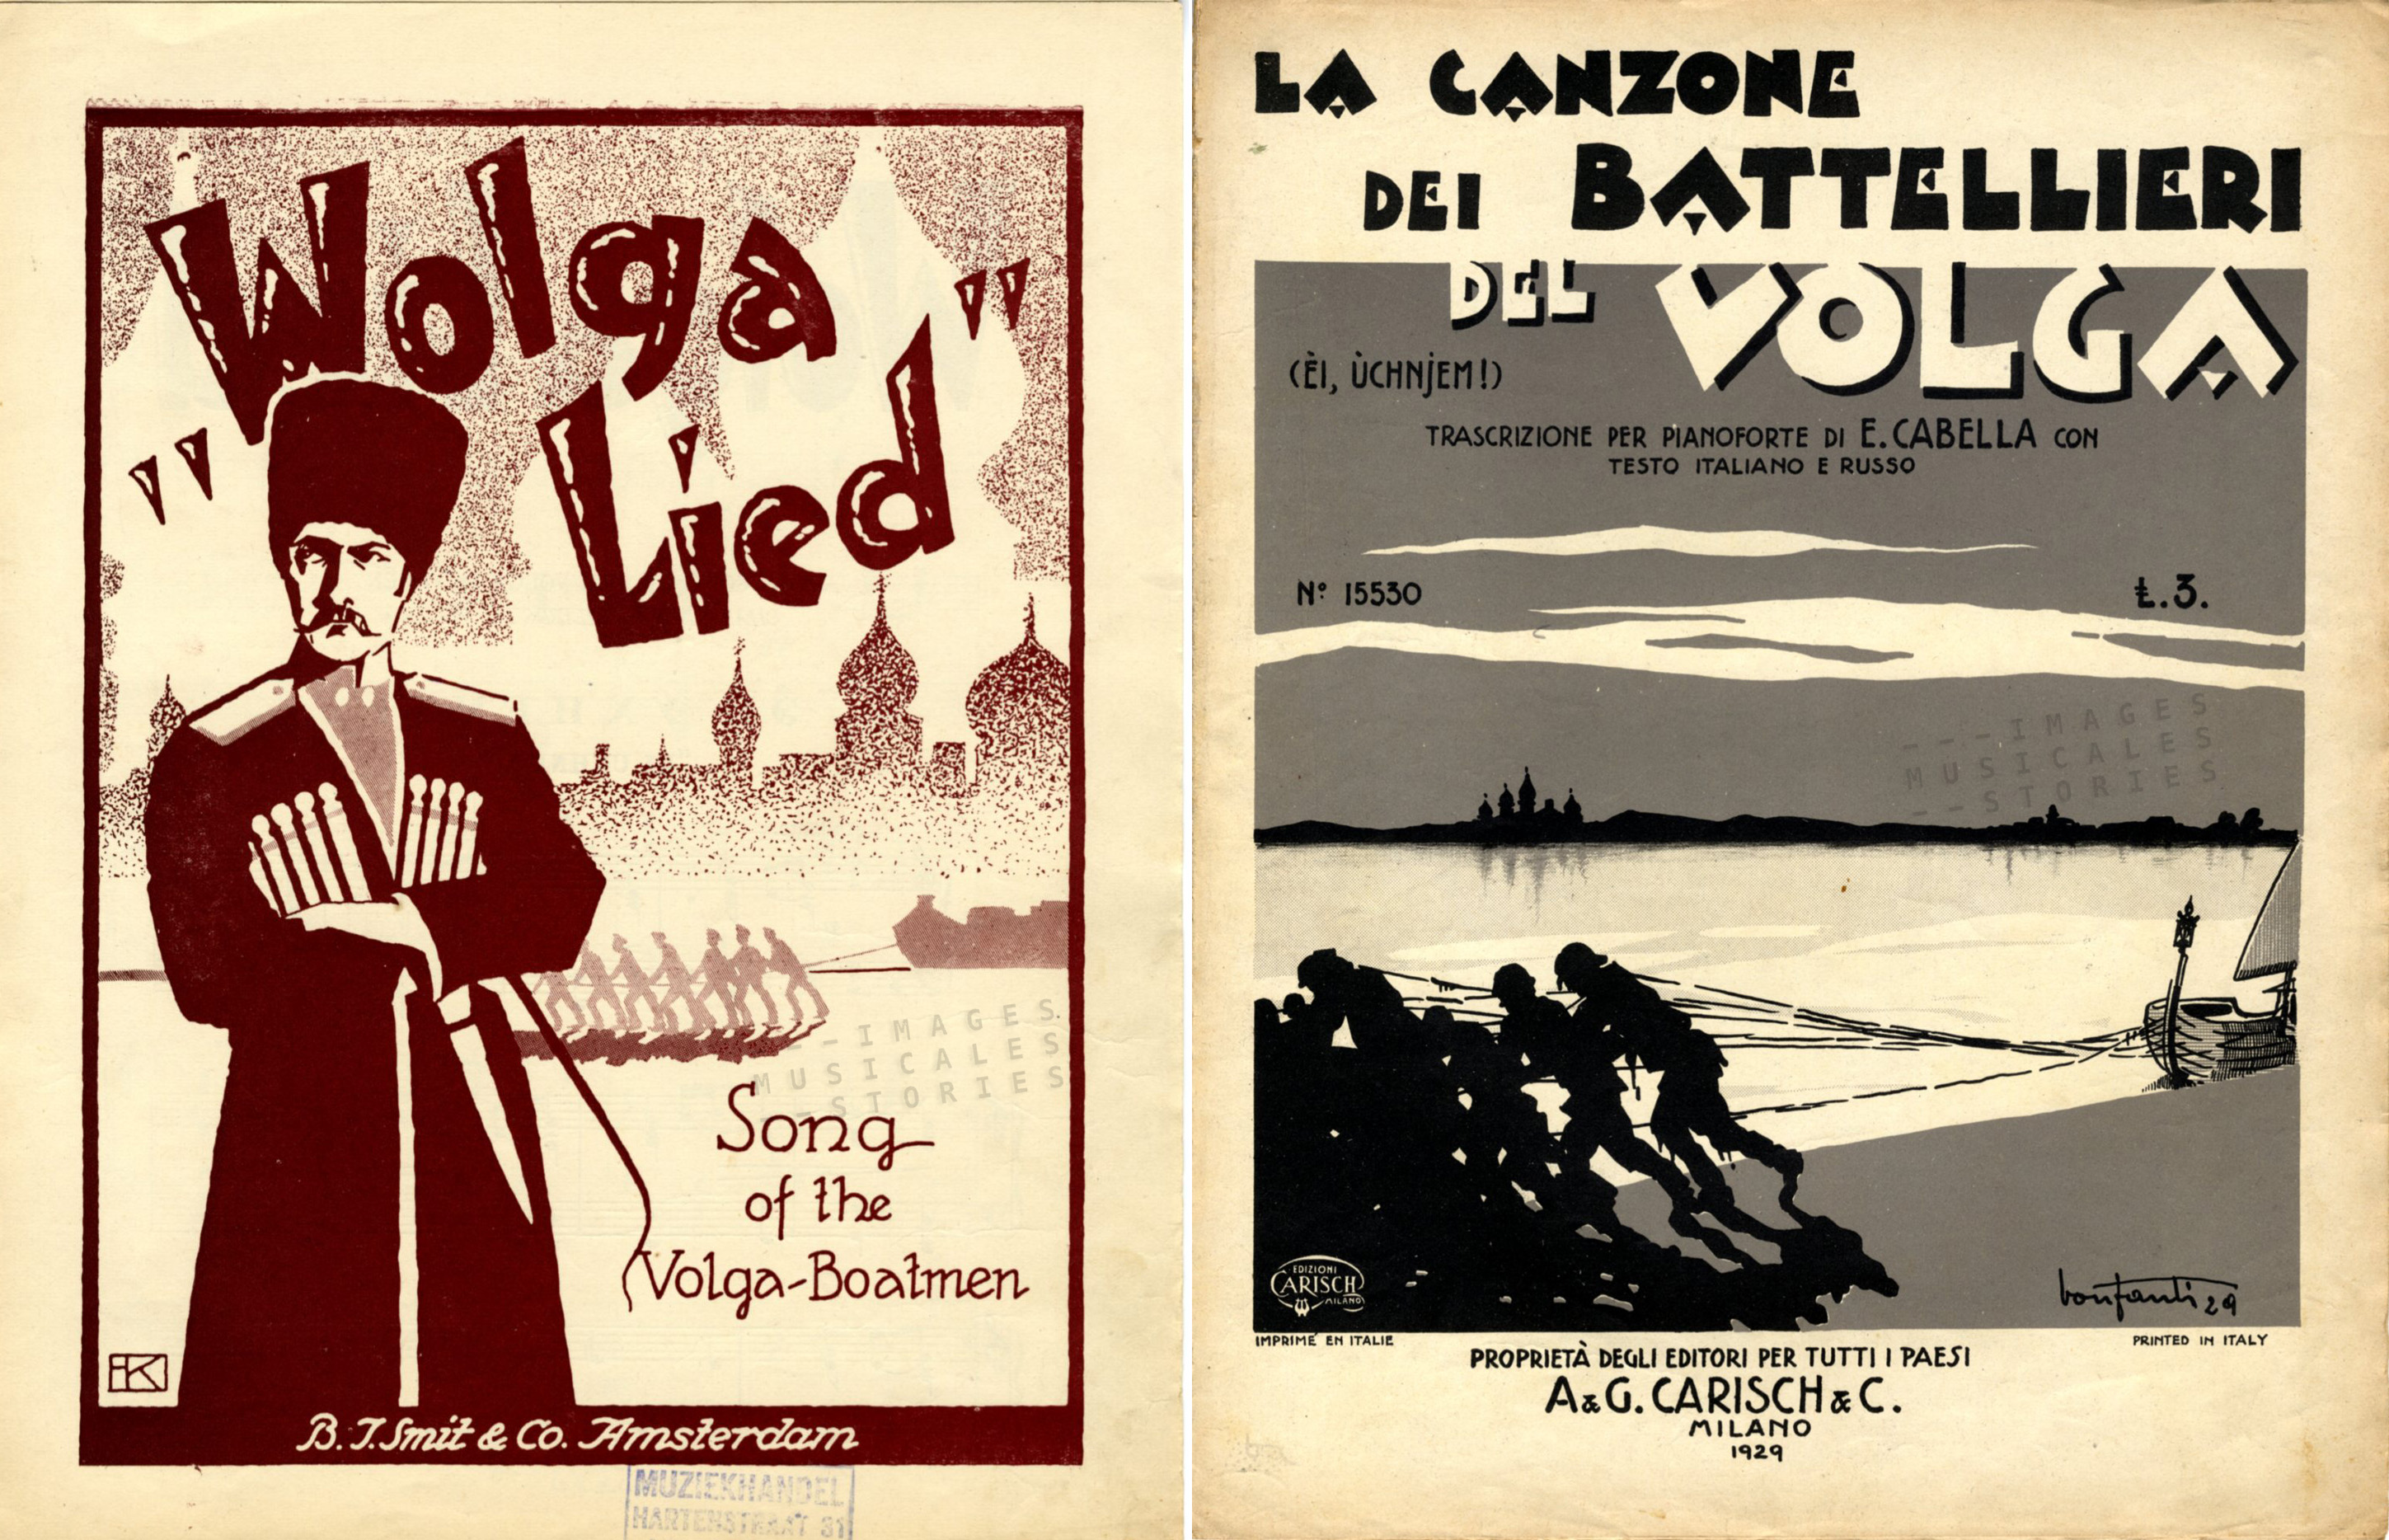 Two-Sheet-Music covers: Left: 'Wolga Lied' published by B. J. Smit & Co (Amsterdam, s.d.) illustration signed F.K. Right: 'La Canzone dei Batellieri del Volga', published by A. & G. Carisch & C. (Milano, 1929), illustrated by Bonfanti.